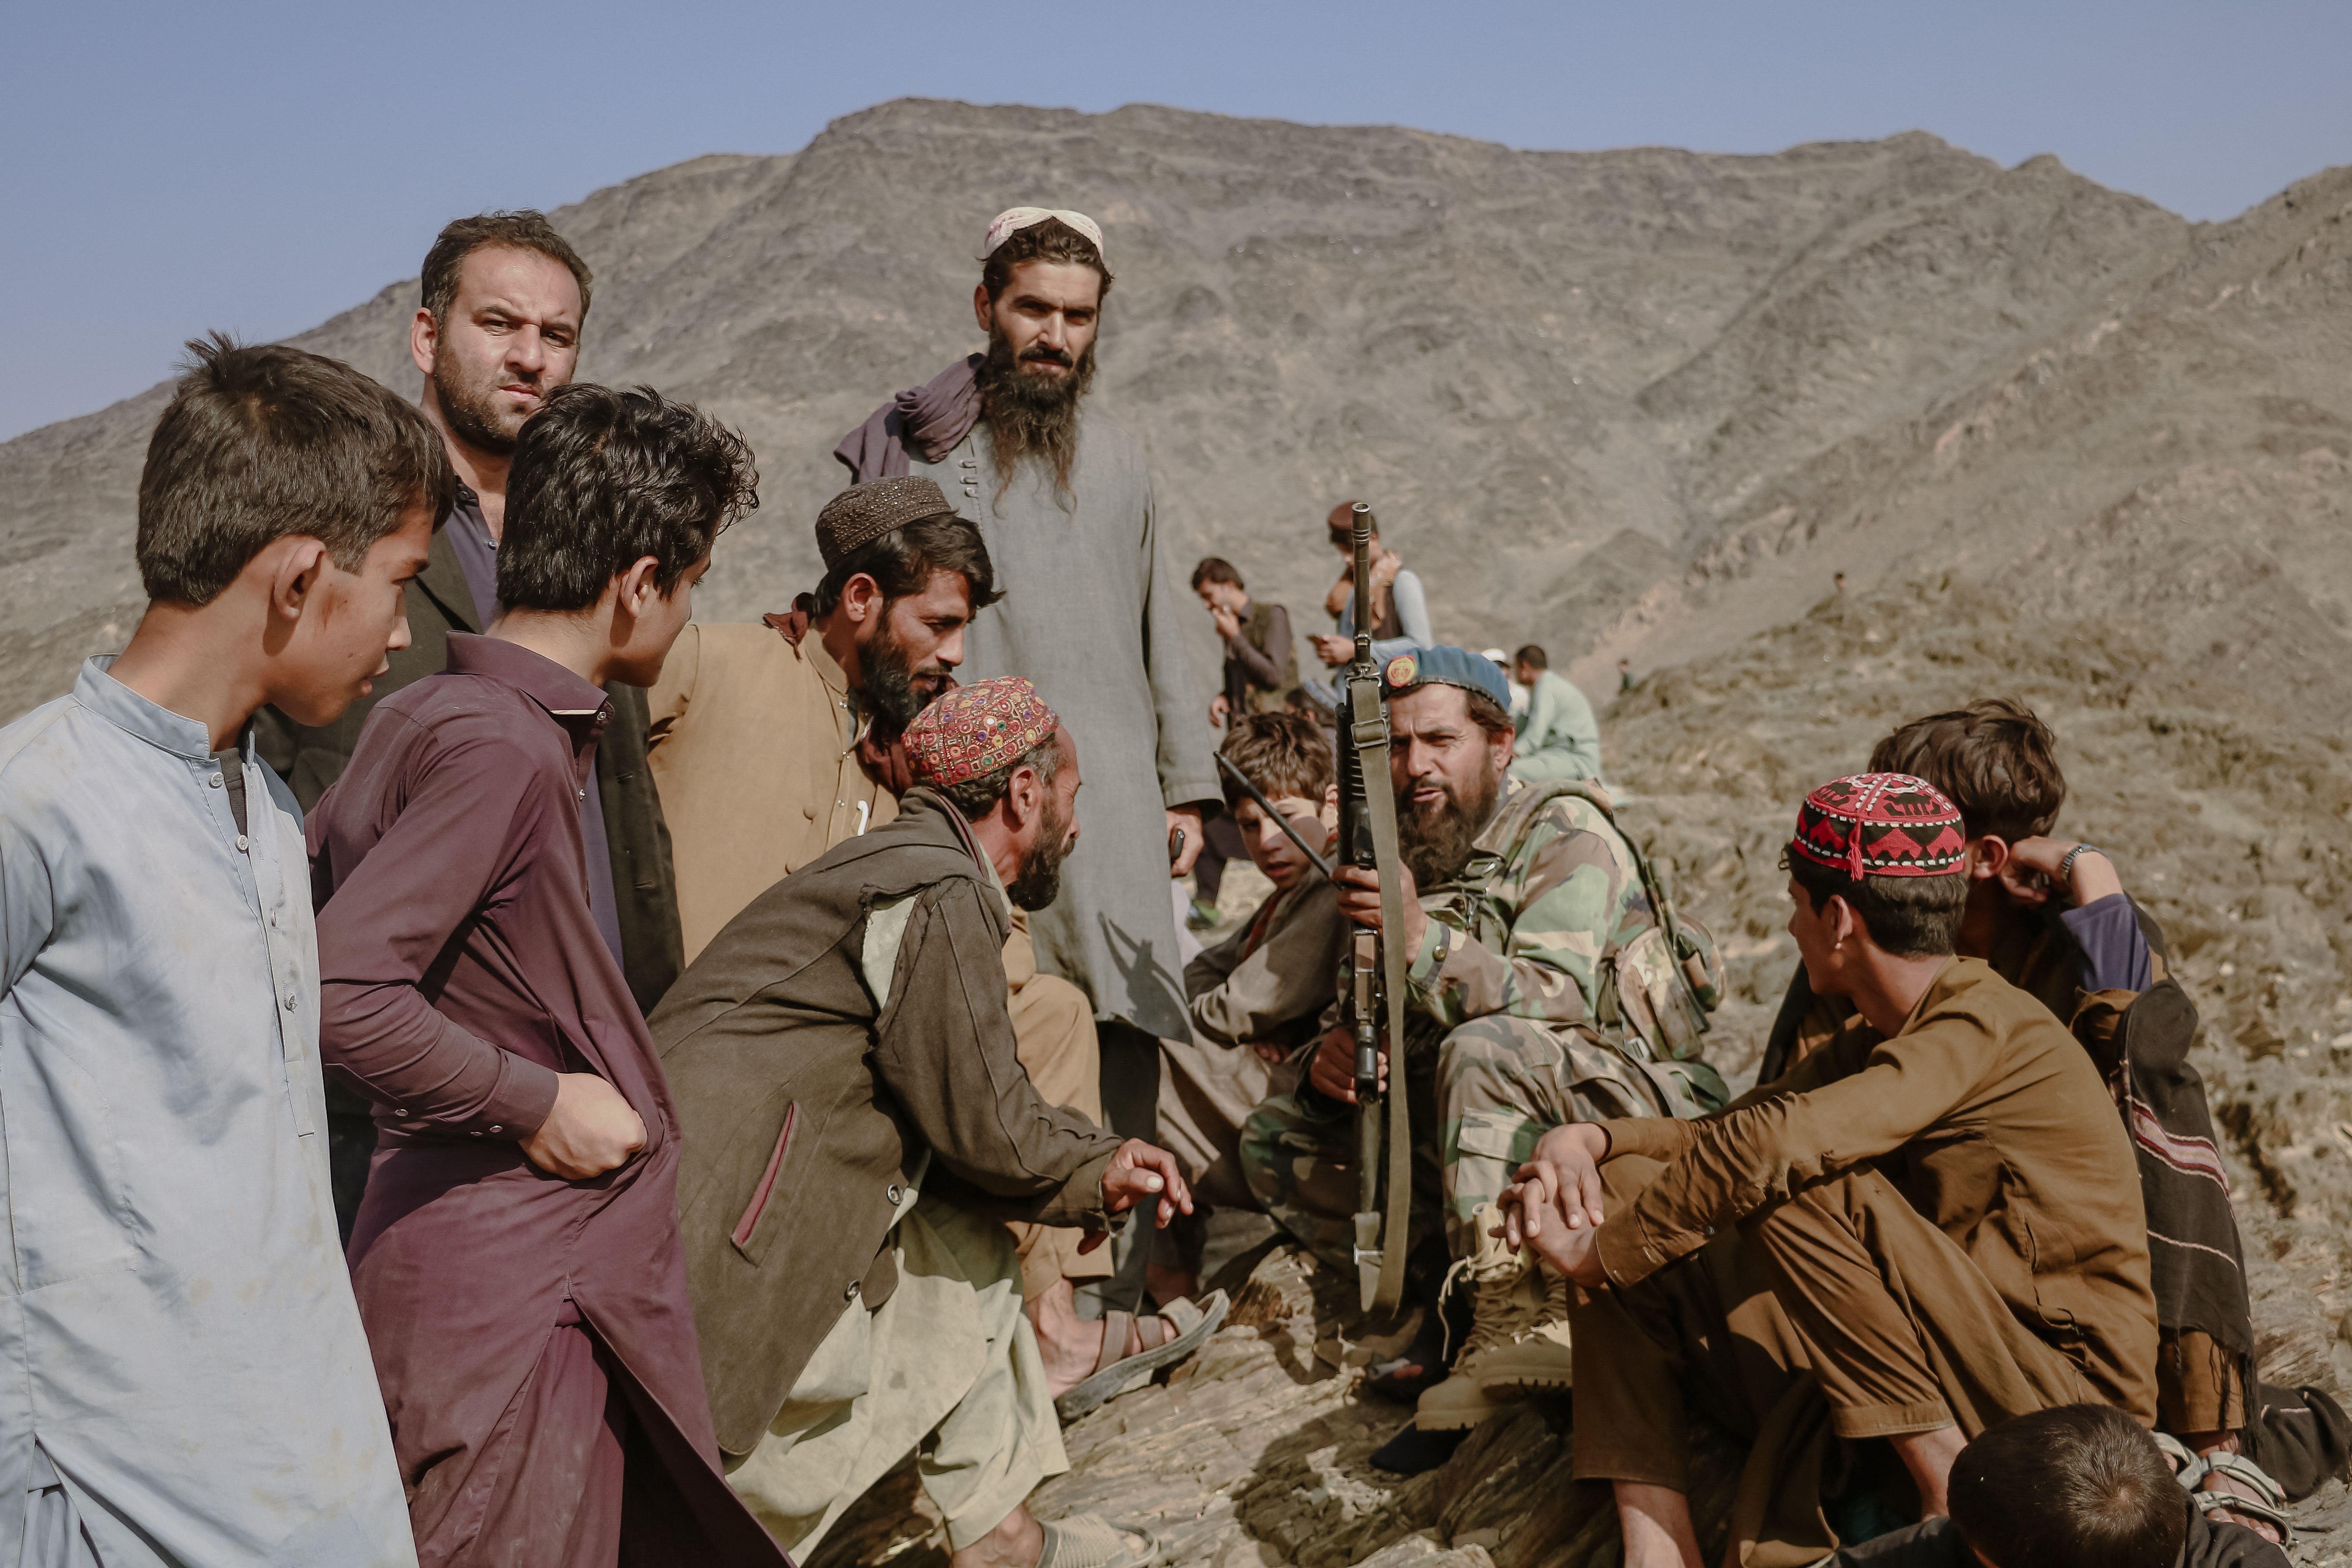 An Afghan refugee group in conversation with Taliban border guards